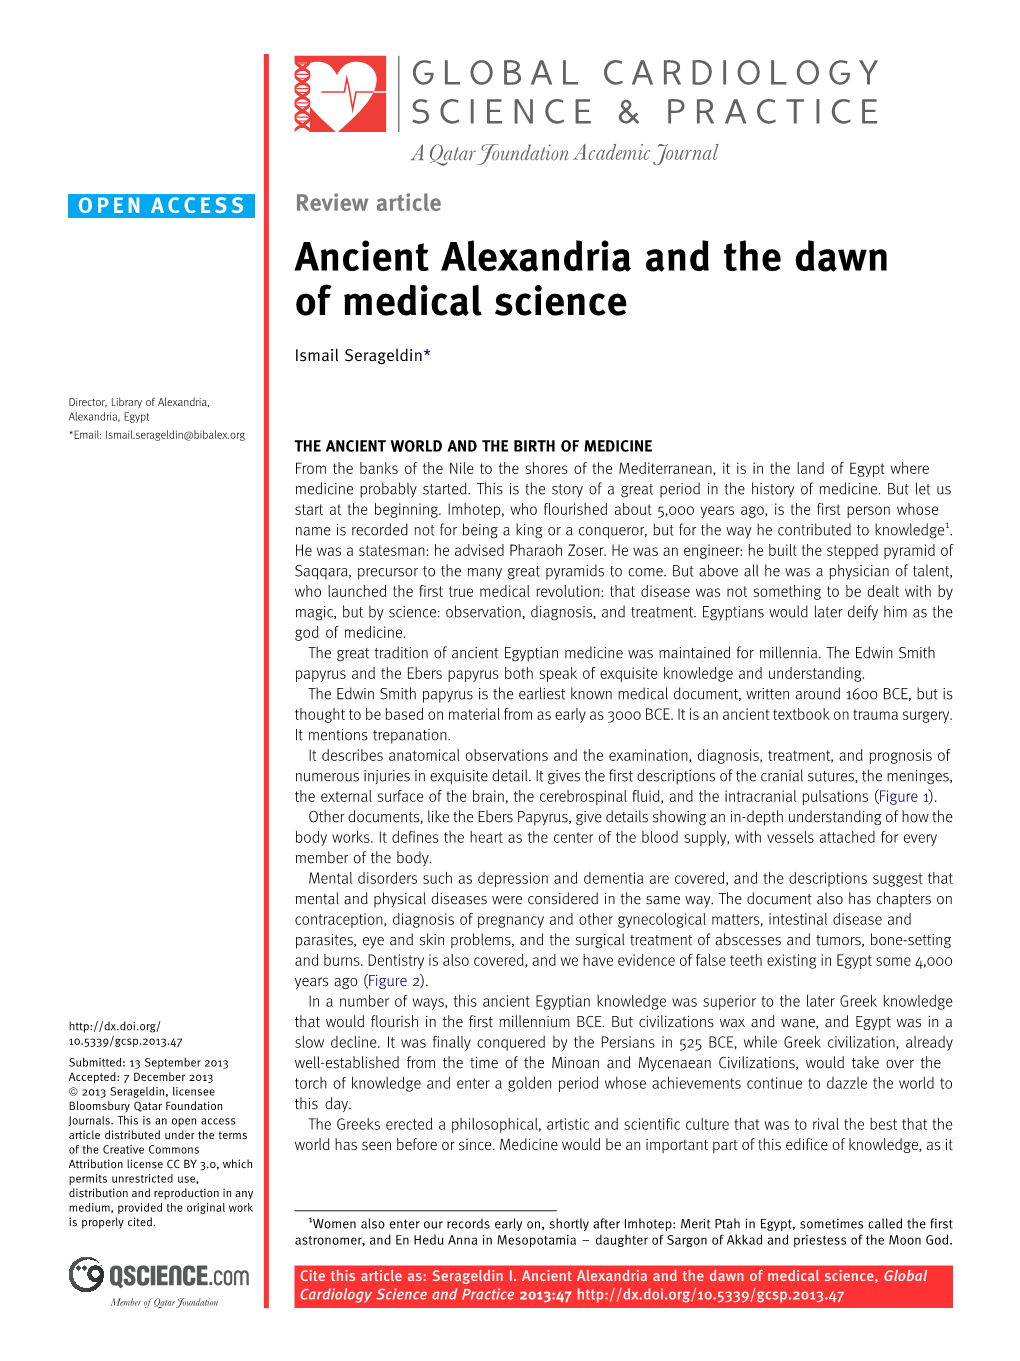 Ancient Alexandria and the Dawn of Medical Science